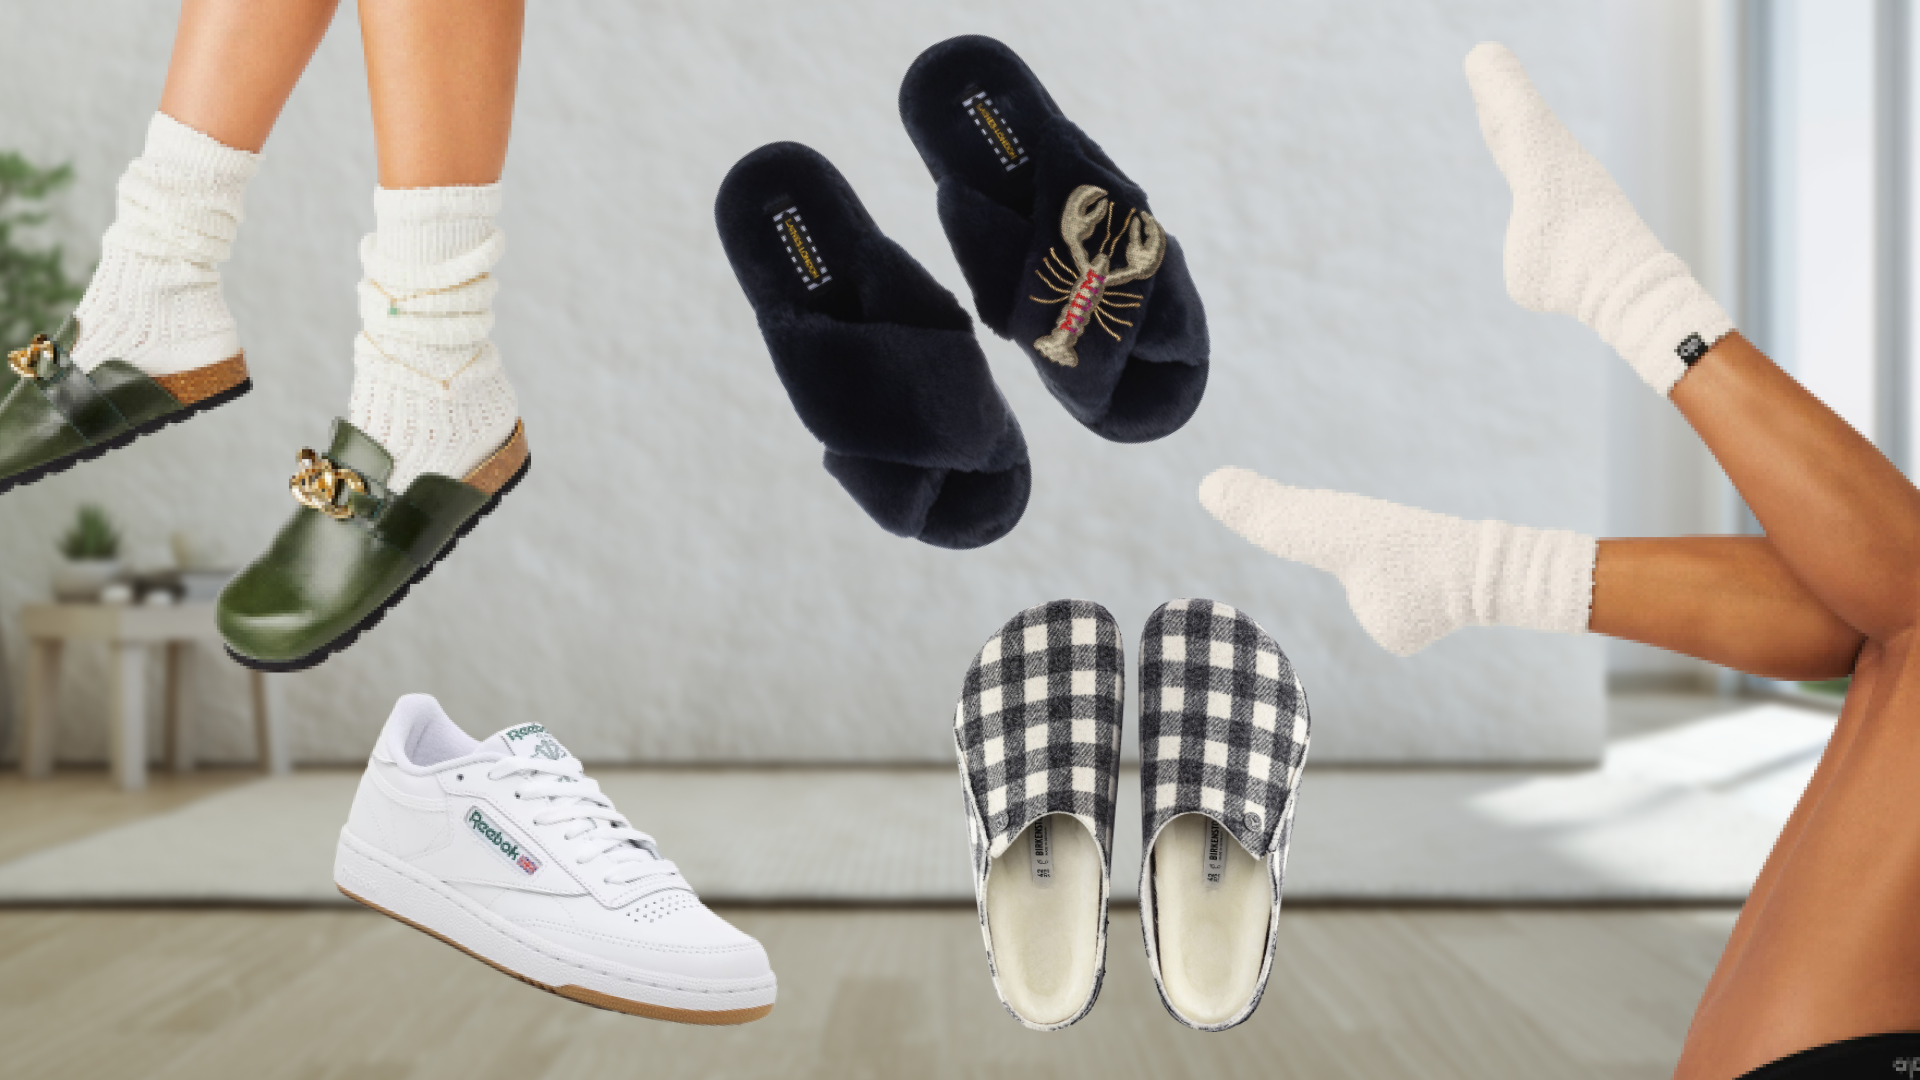 Cozy socks, house slippers, everyday sneakers and slip ons